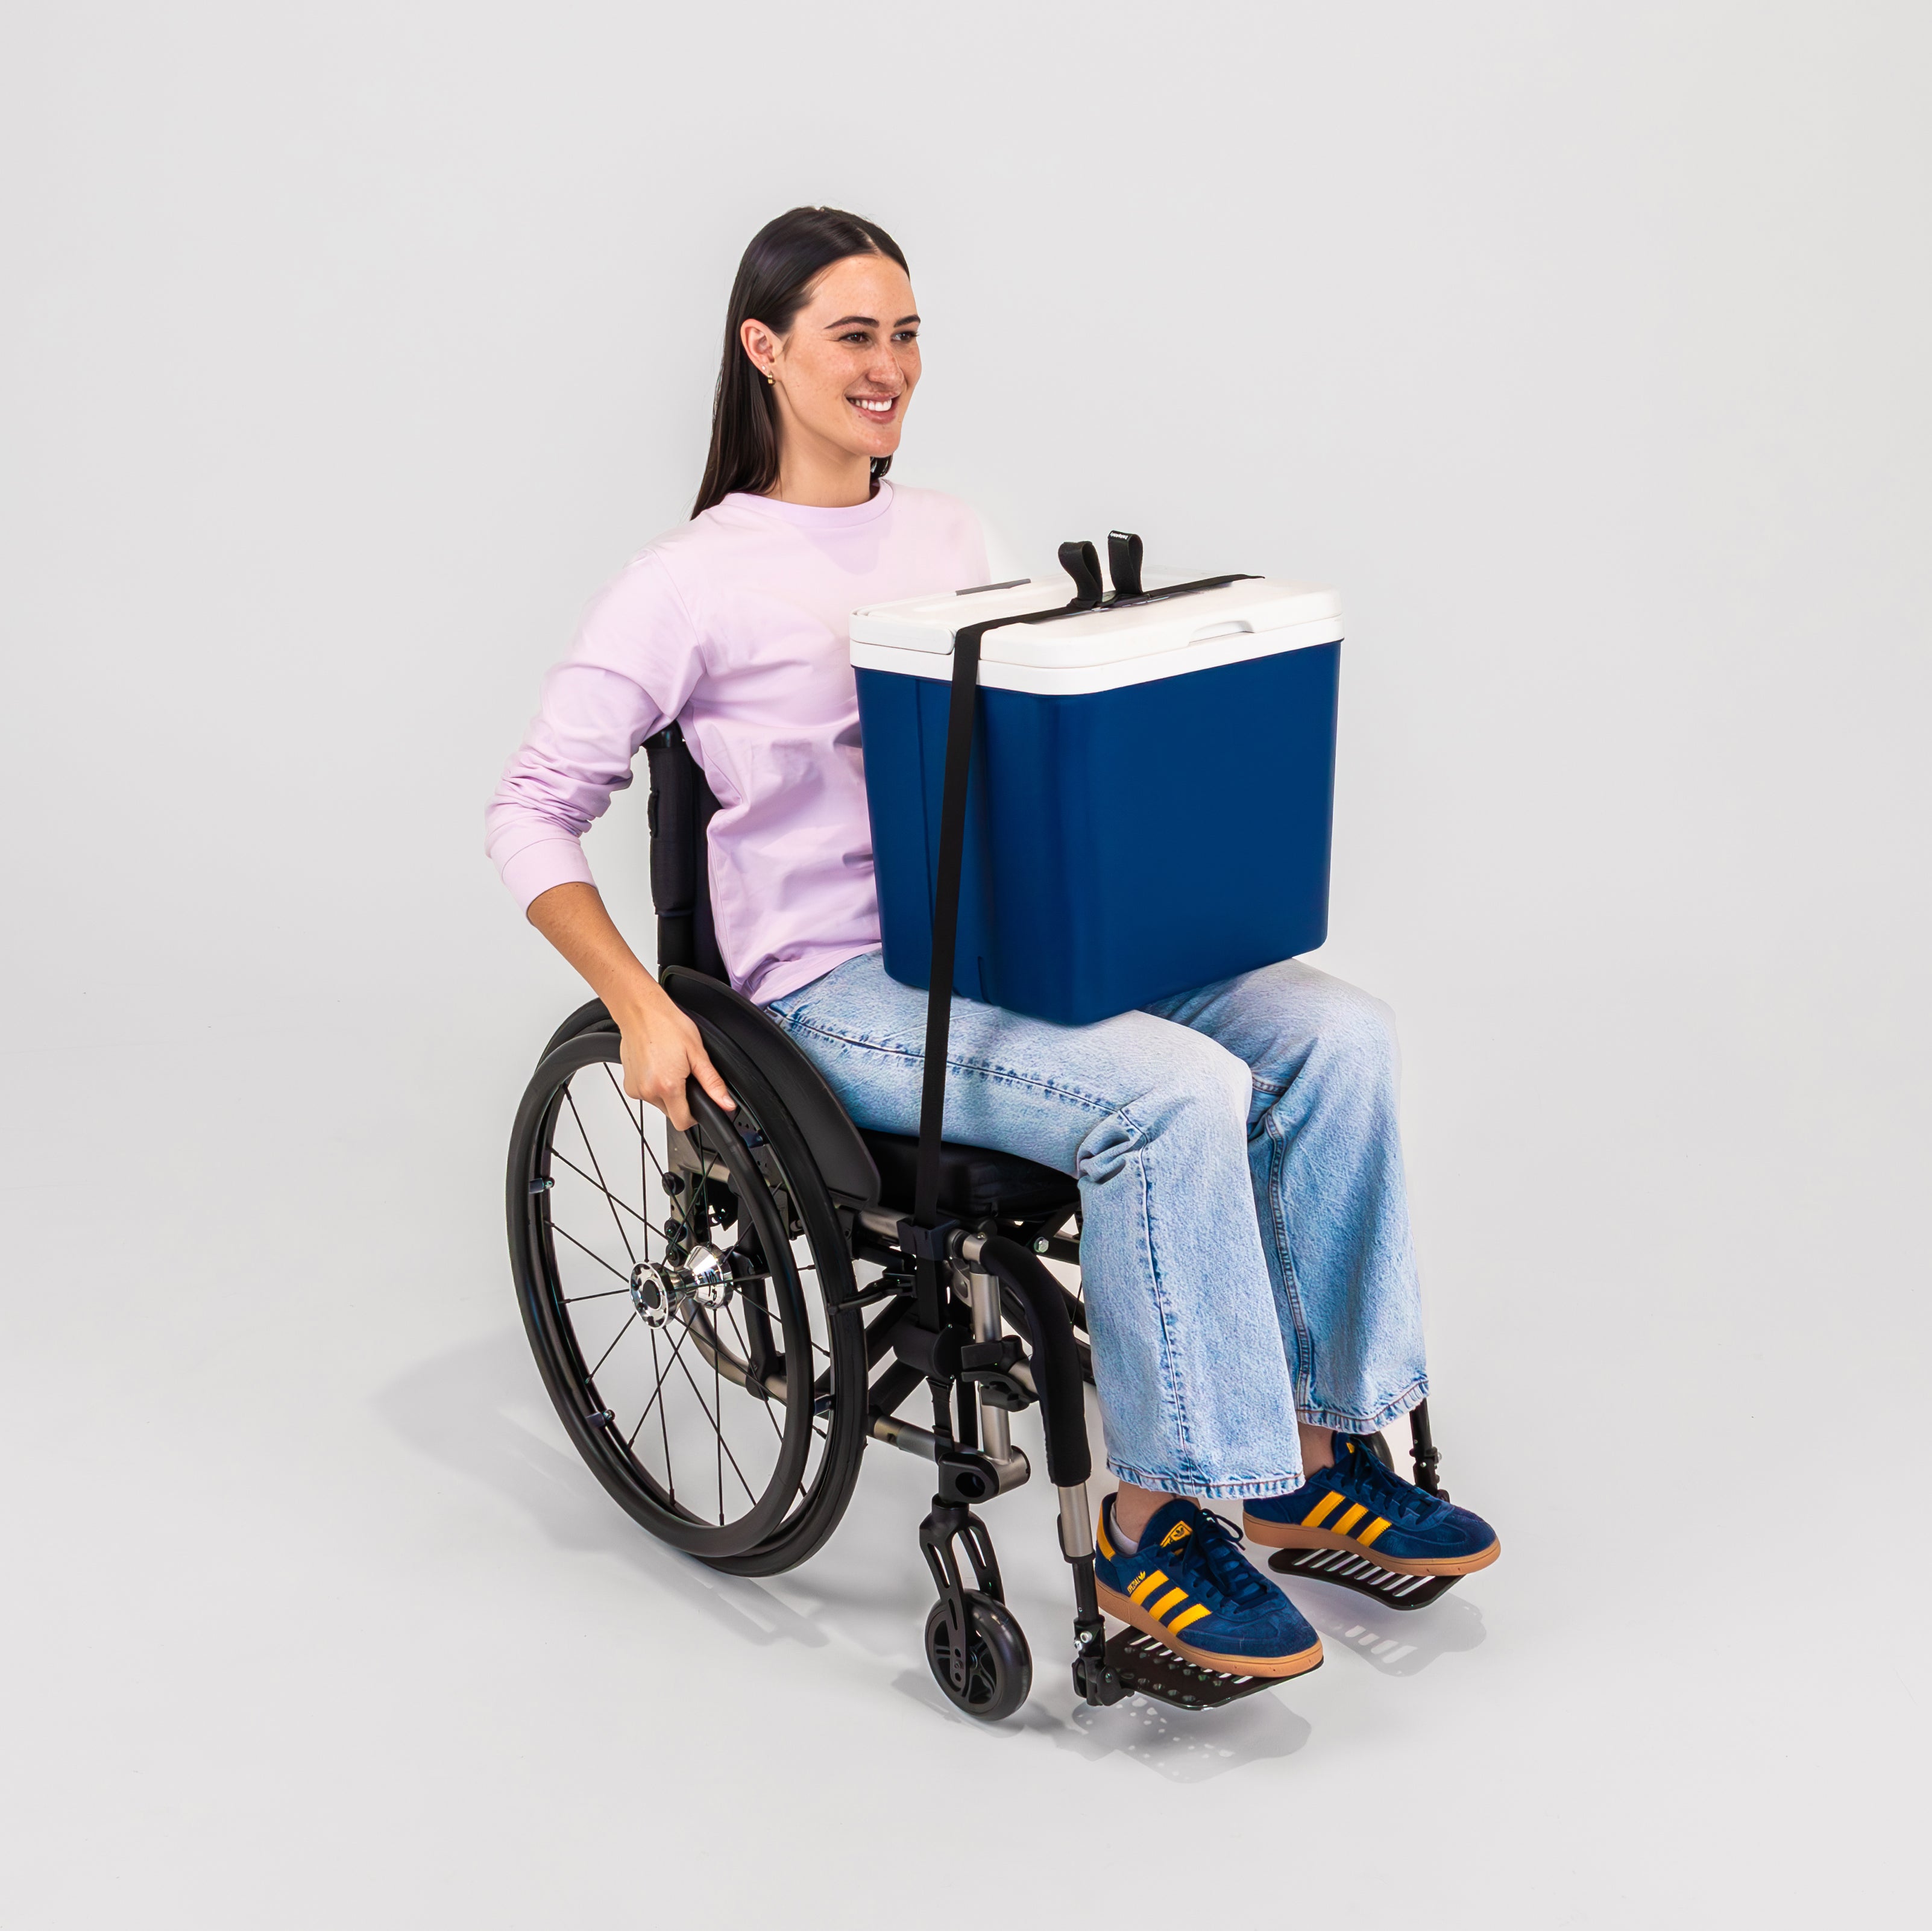 Smiling women seated in a folding wheelchair with a cooler or chilly bin secured to her lap using LapStacker Flex.